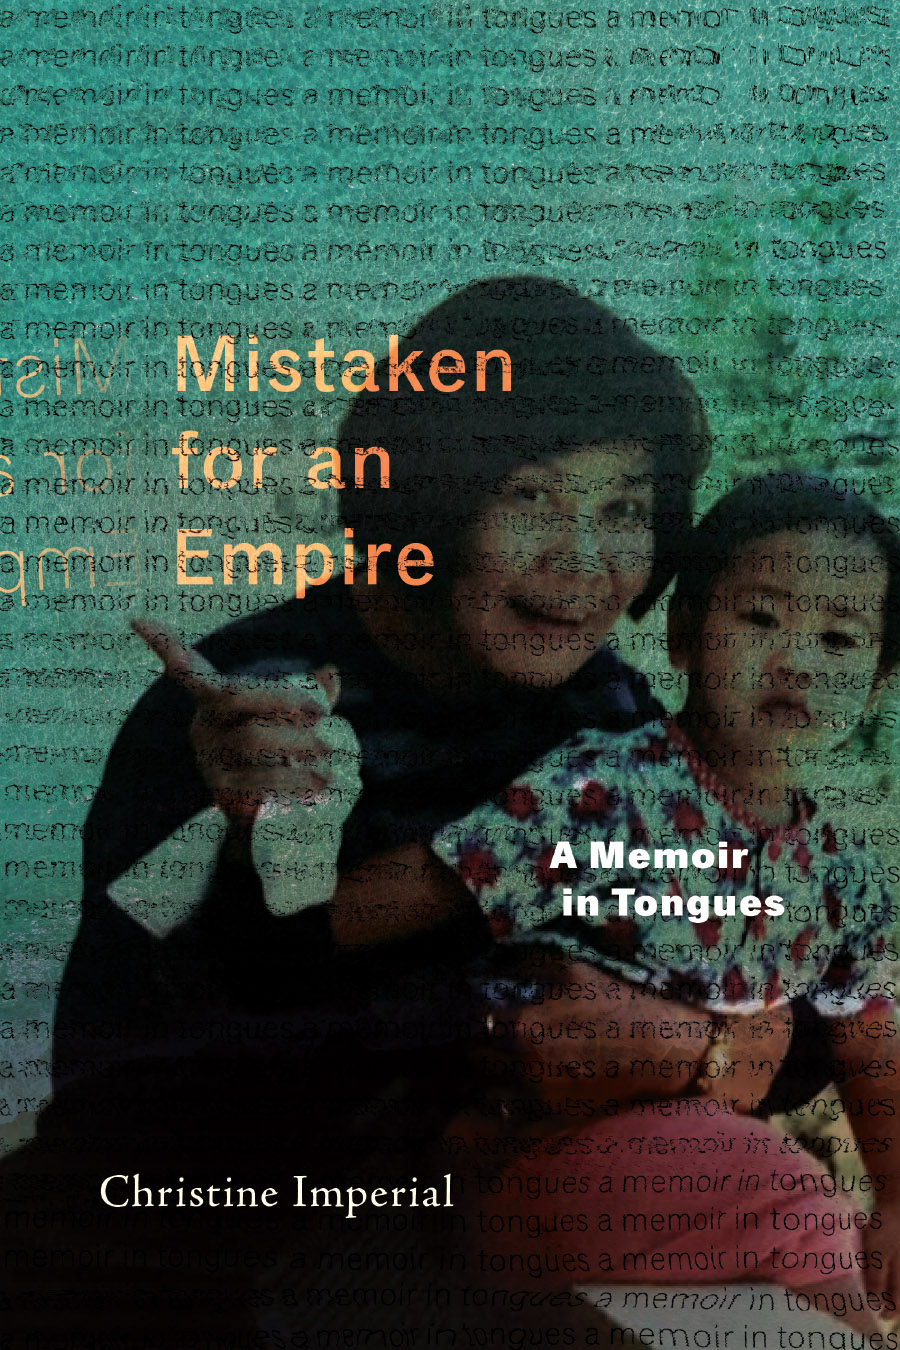 Front cover of Mistaken for an Empire: A Memoir in Tongues, by Christine Imperial, featuring a snapshot of the author as a young child, seated on a mother-figure's lap, who is pointing happily toward something off-camera, while the young child looks doubtful.